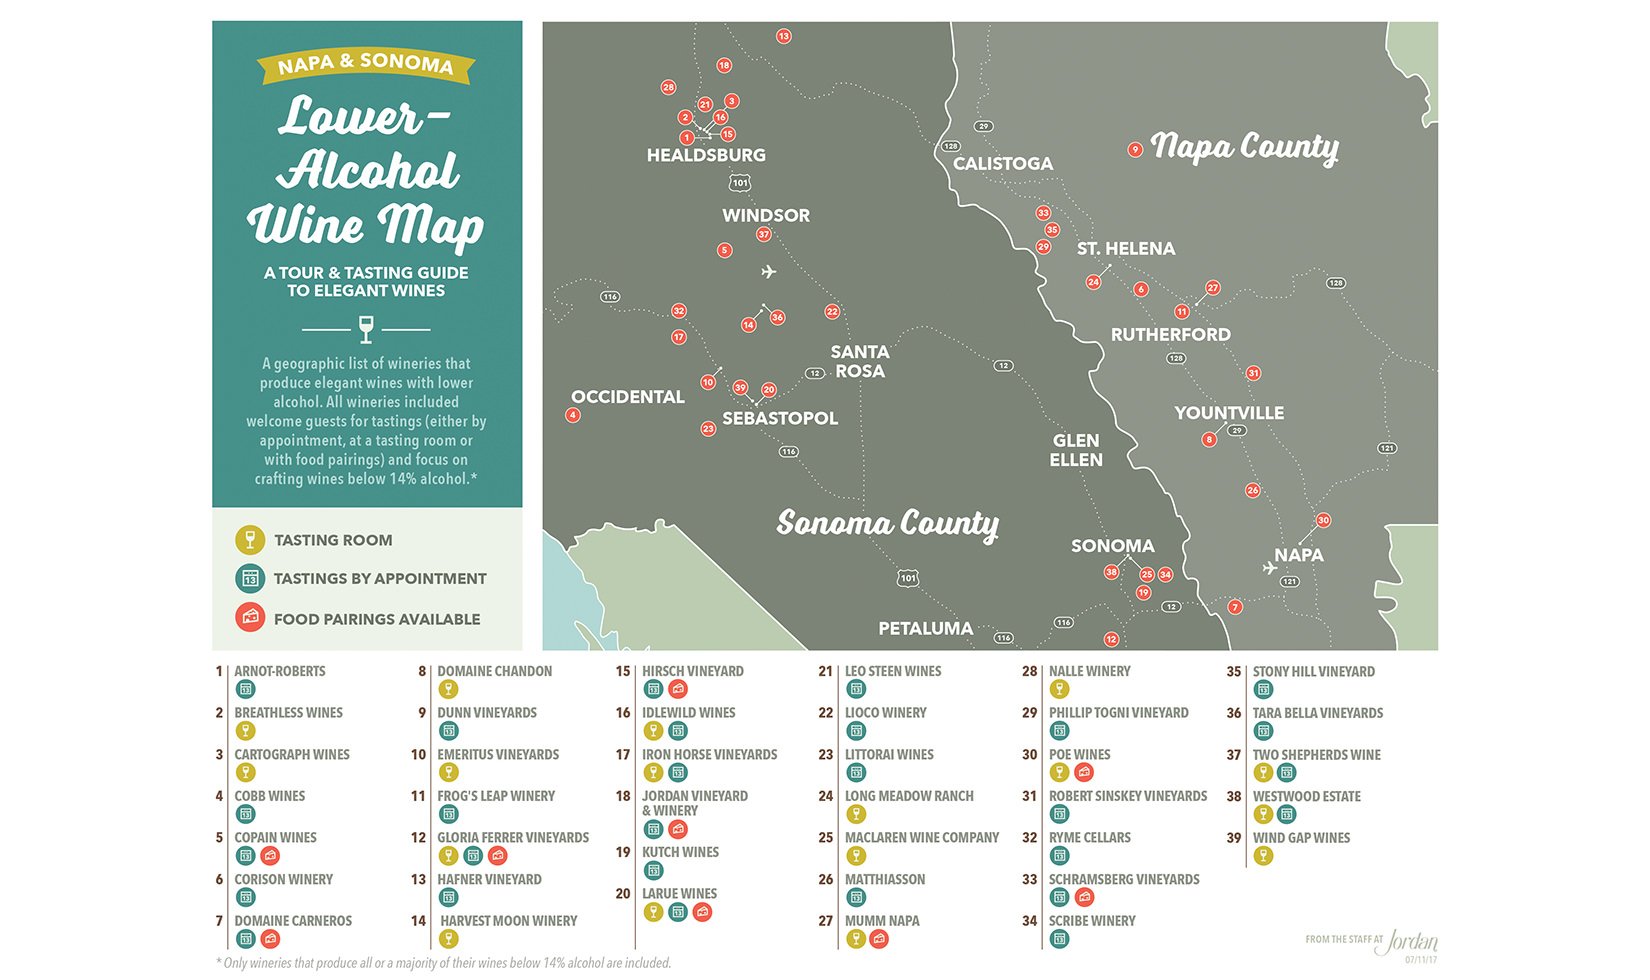 Lower-Alcohol wine Map of Sonoma and Napa Wineries by Jordan Vineyard & Winery